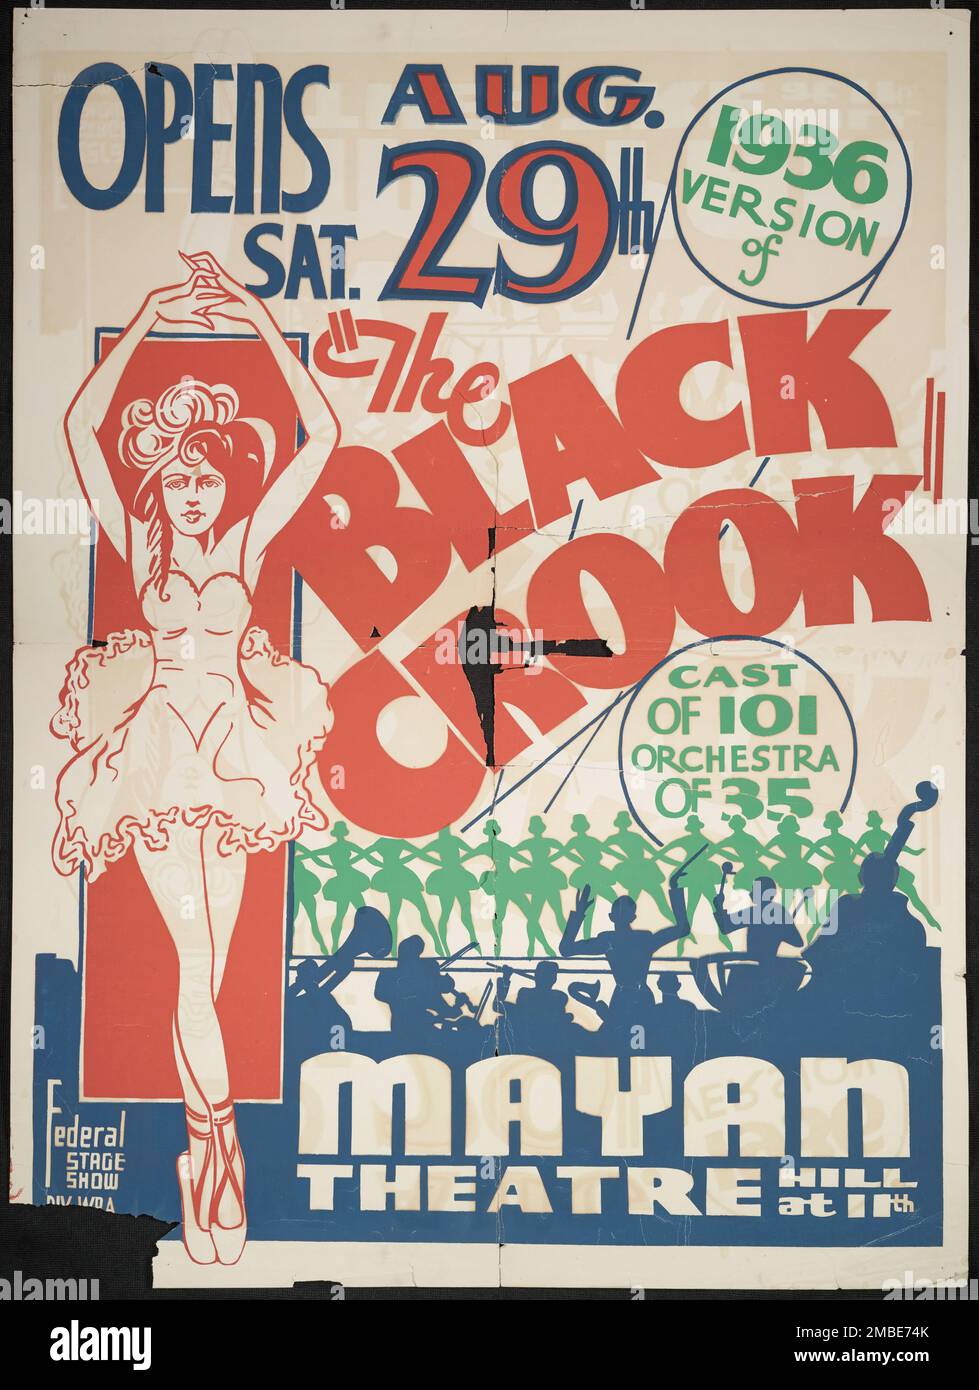 The Black Crook, Los Angeles, 1936. '...1936 Version of &quot;The Black Crook&quot;...Cast of 101 - Orchestra of 35...Mayan Theatre...Federal Stage Show - Div. of W.P.A.'. &quot;The Black Crook&quot;, first produced in New York City with great success in 1866, is claimed by many to be the first popular piece that conforms to the modern notion of a musical. The Federal Theatre Project, created by the U.S. Works Progress Administration in 1935, was designed to conserve and develop the skills of theater workers, re-employ them on public relief, and to bring theater to thousands in the United Stat Stock Photo